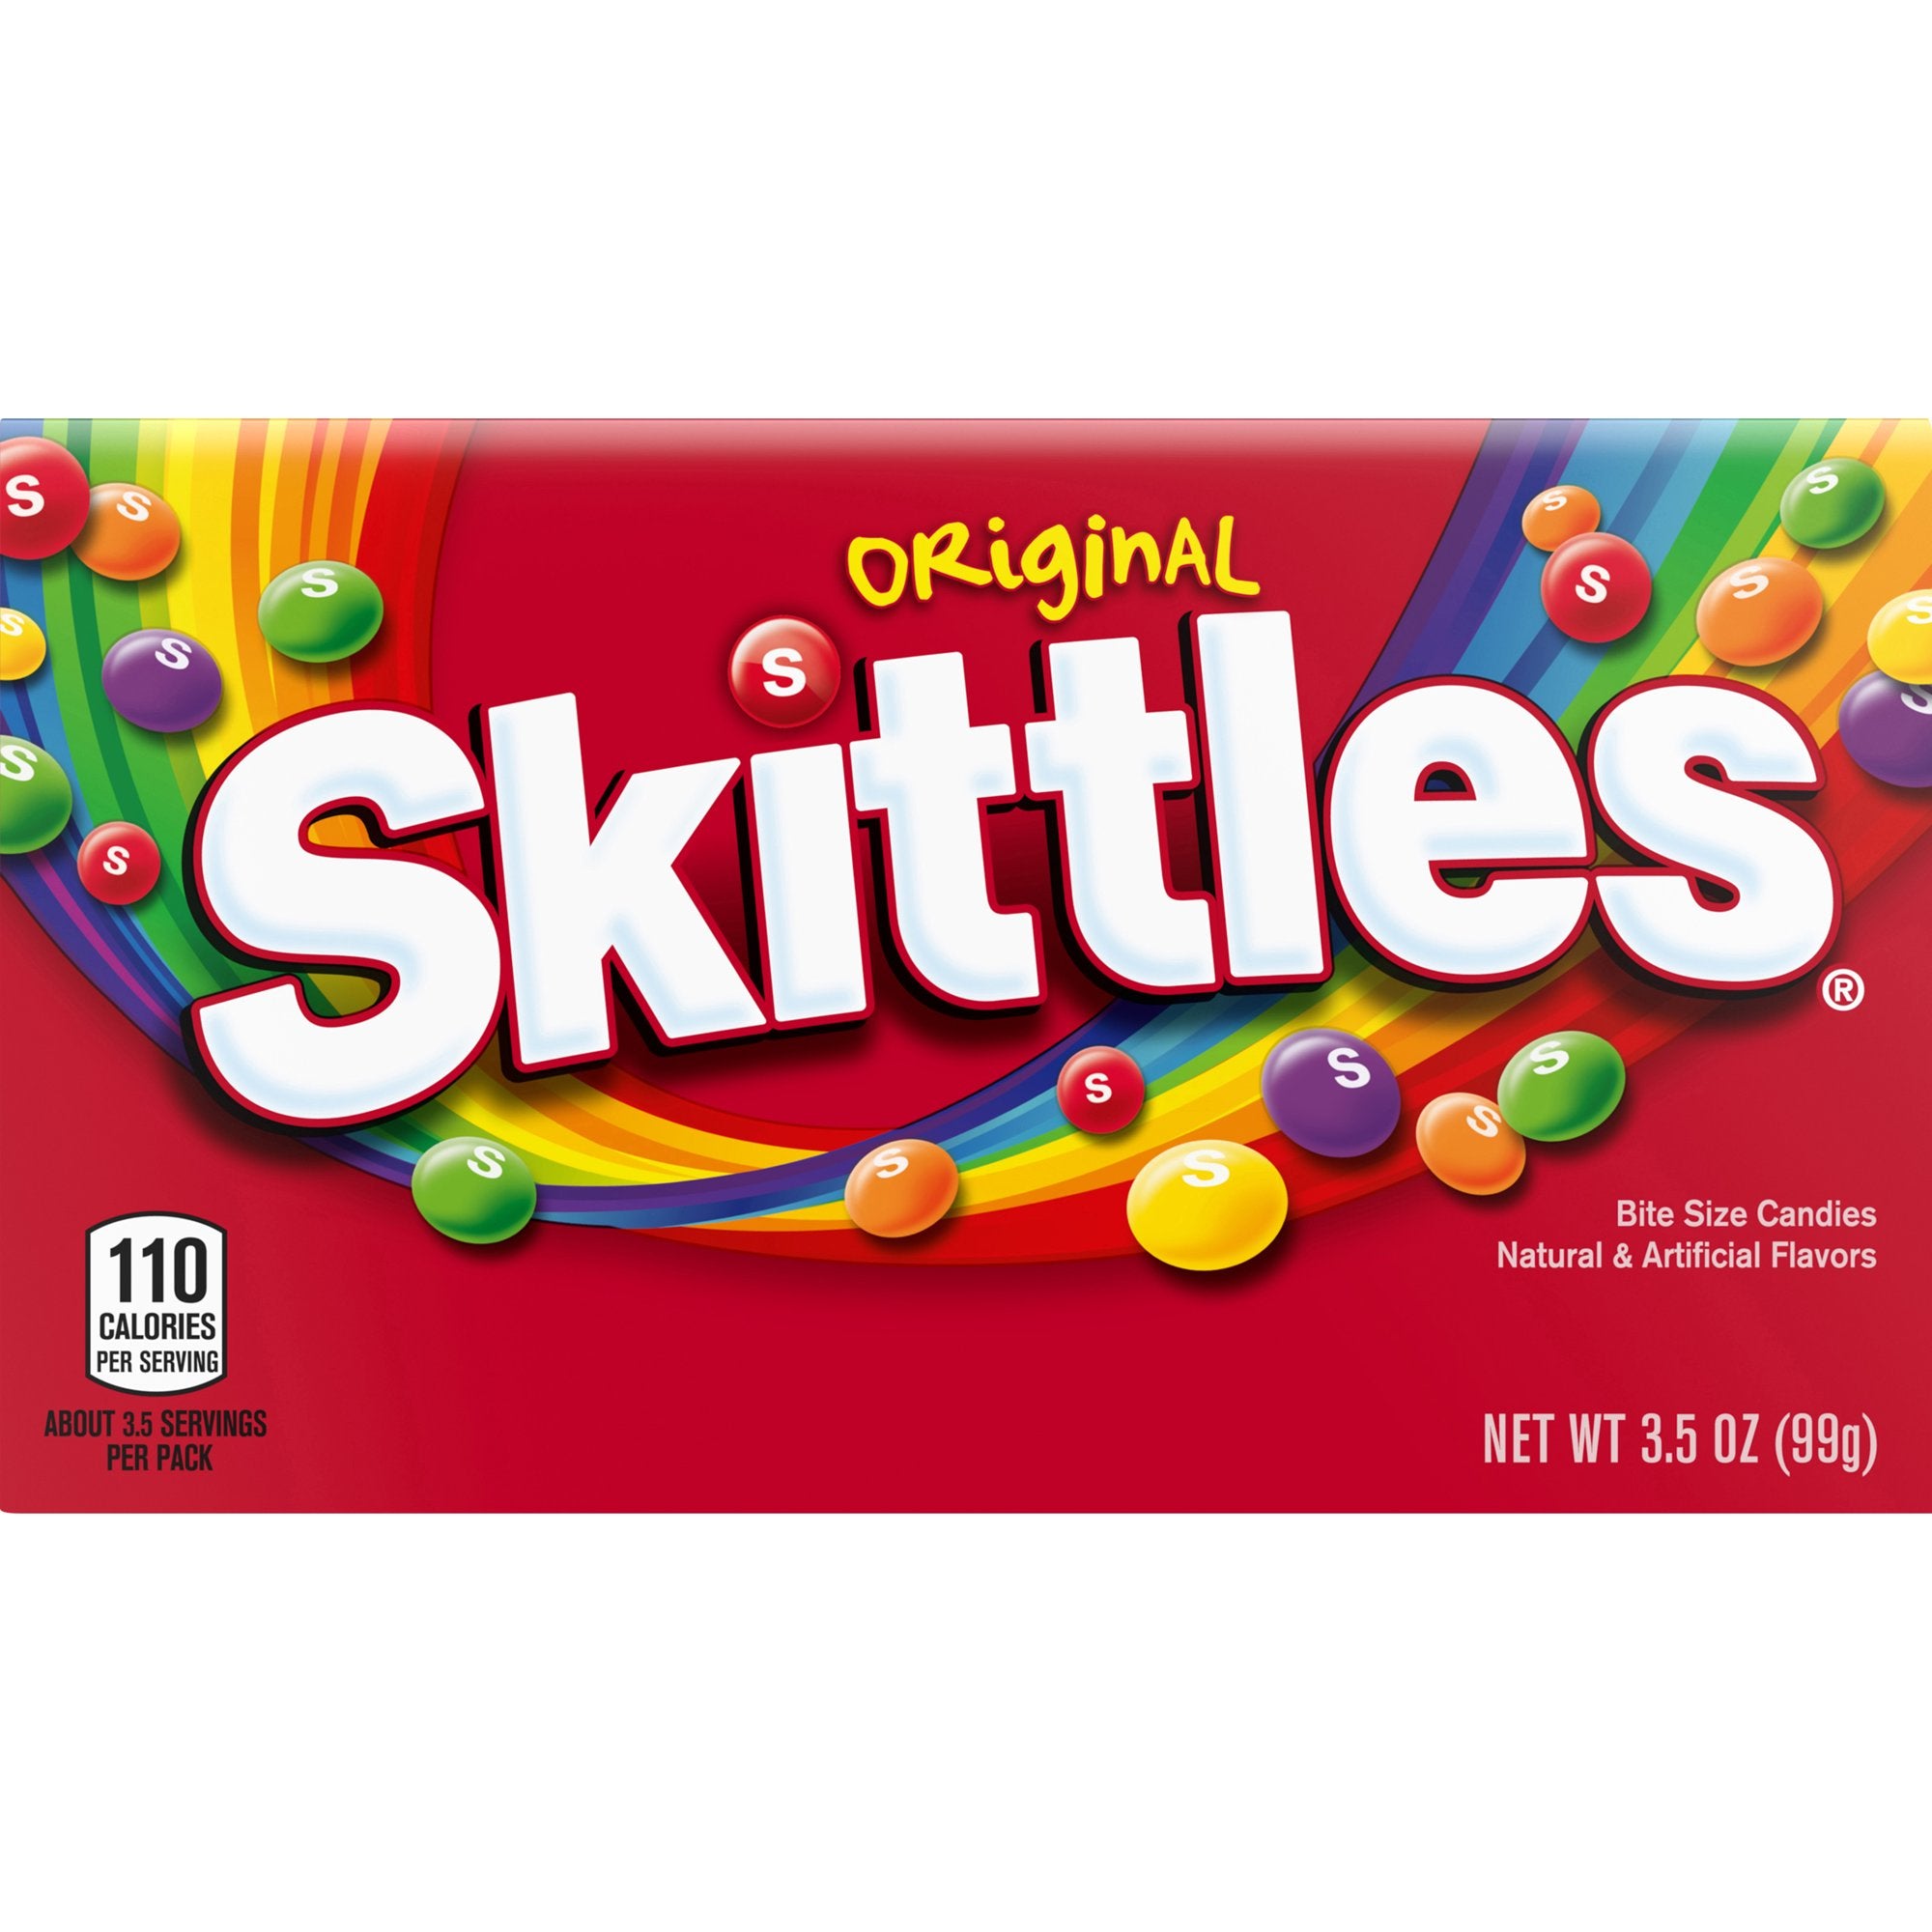 Skittles - Old Time Candy - Chocolates & Sweets 